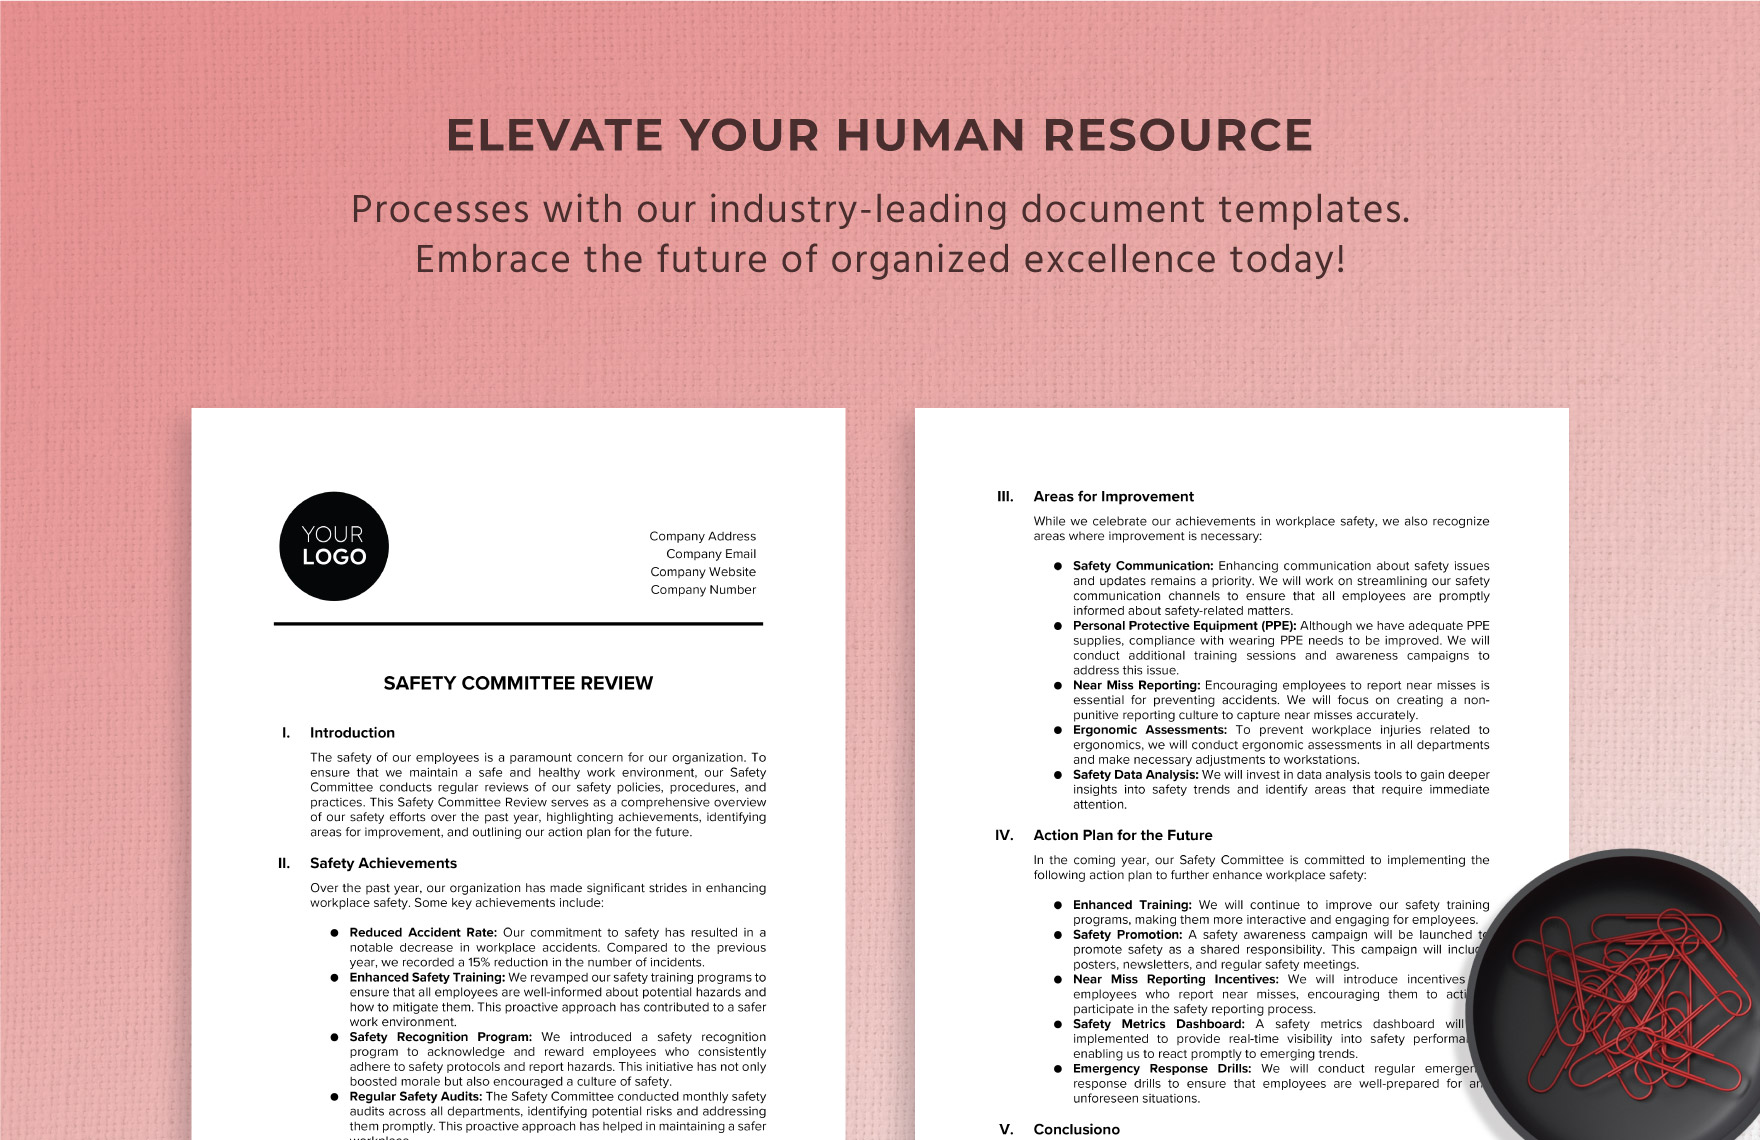 Safety Committee Review HR Template